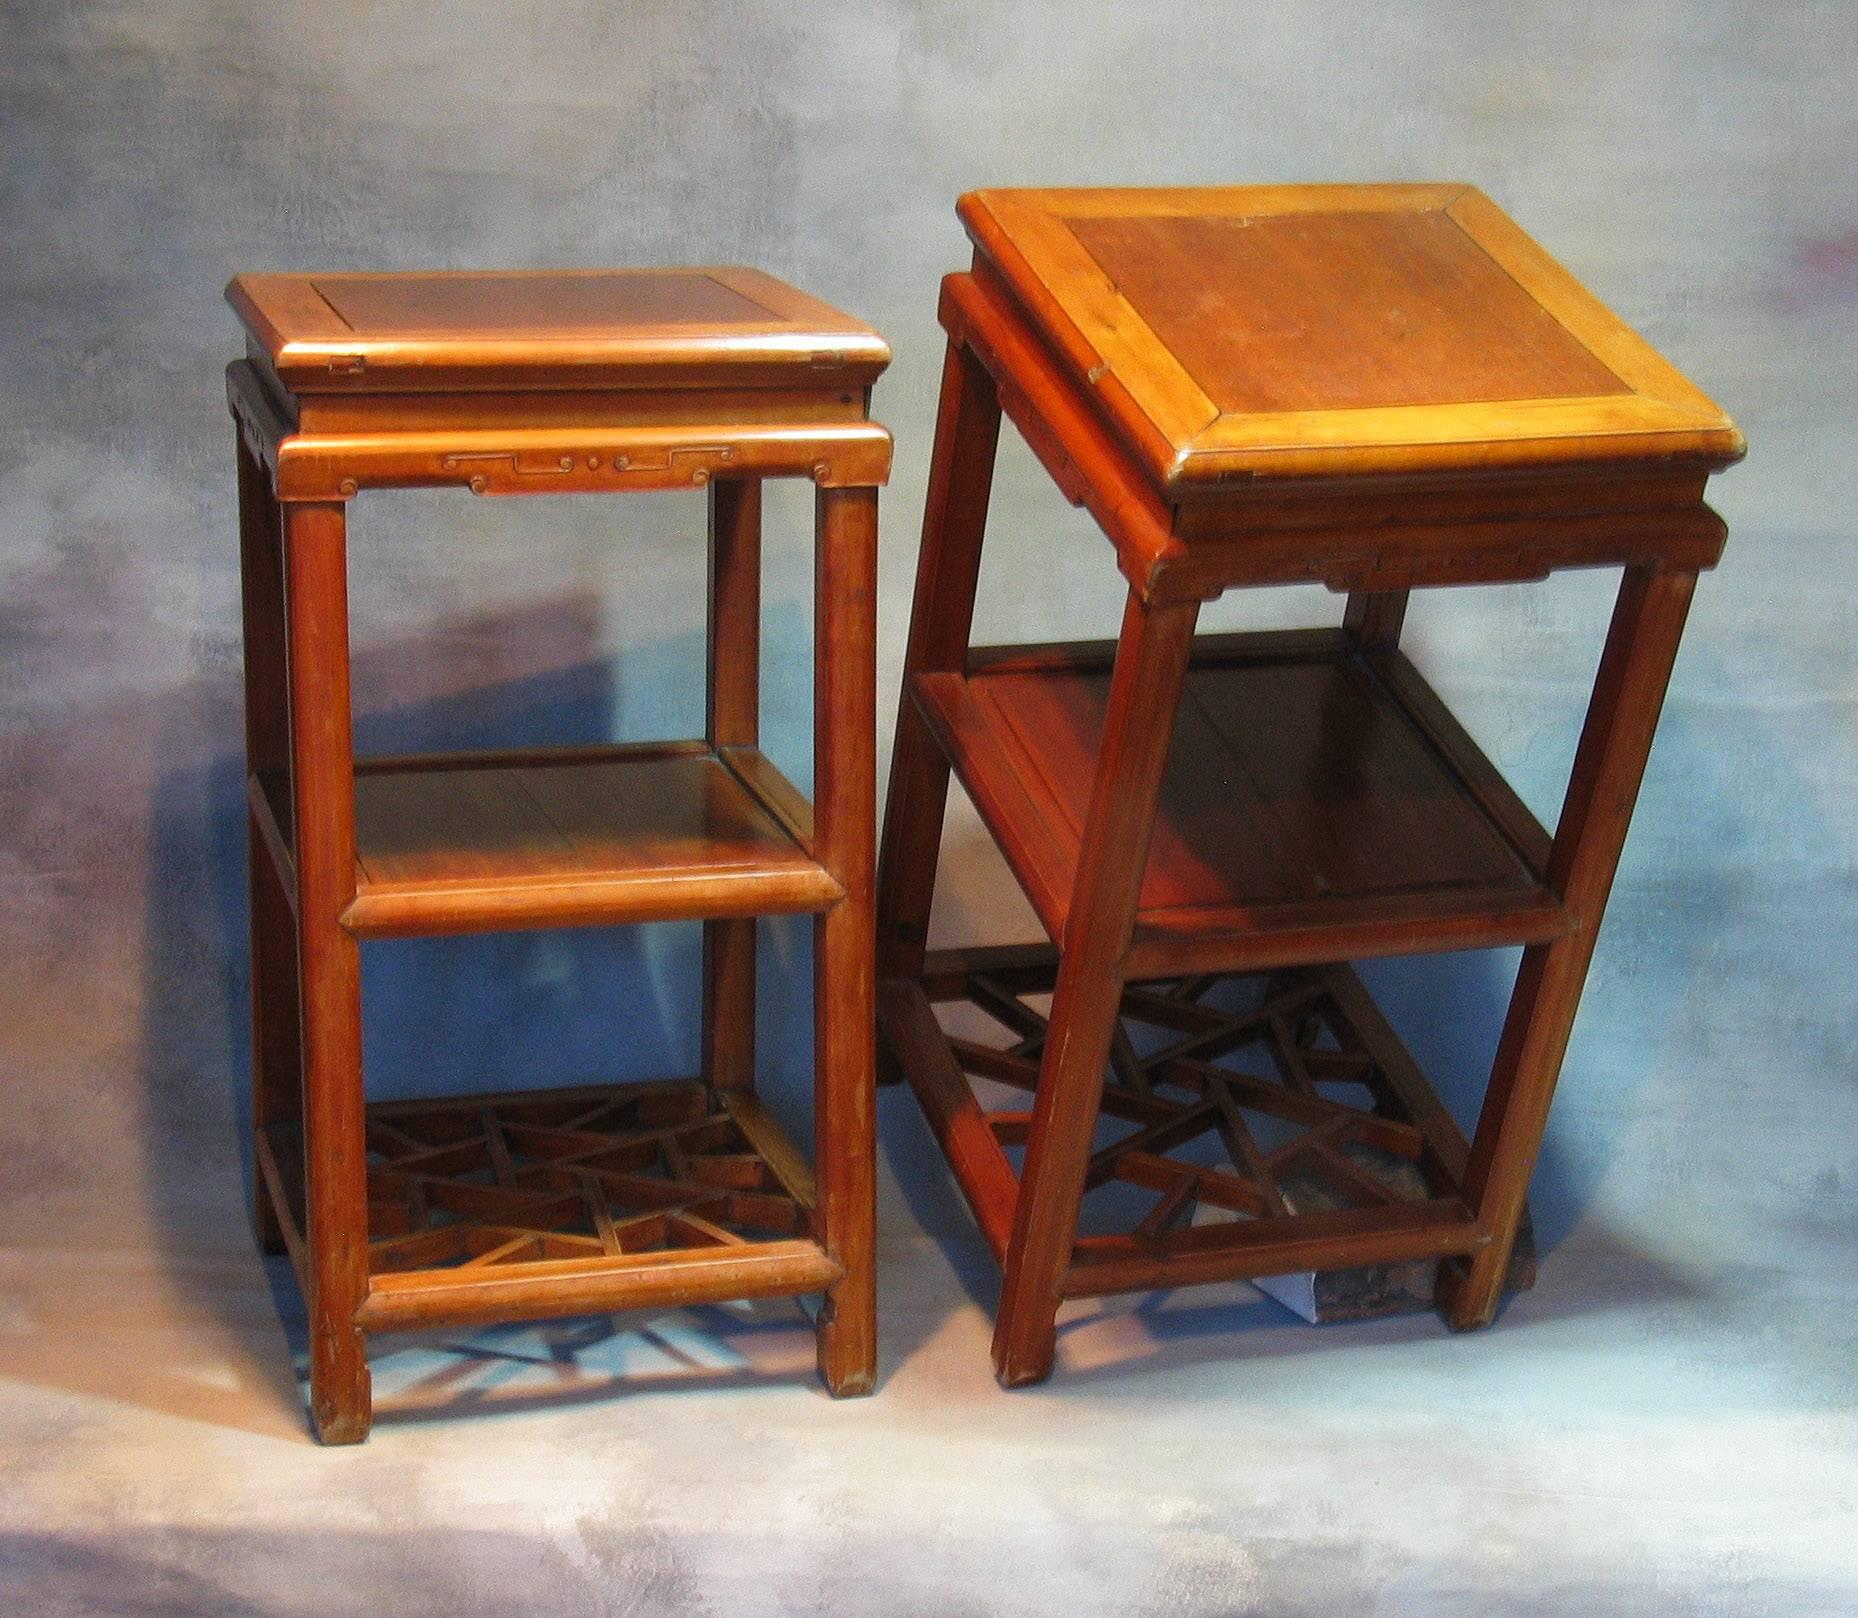 Late Qing Dynasty Carved Hardwood Side Tables or Stands Southern Chinese For Sale 4